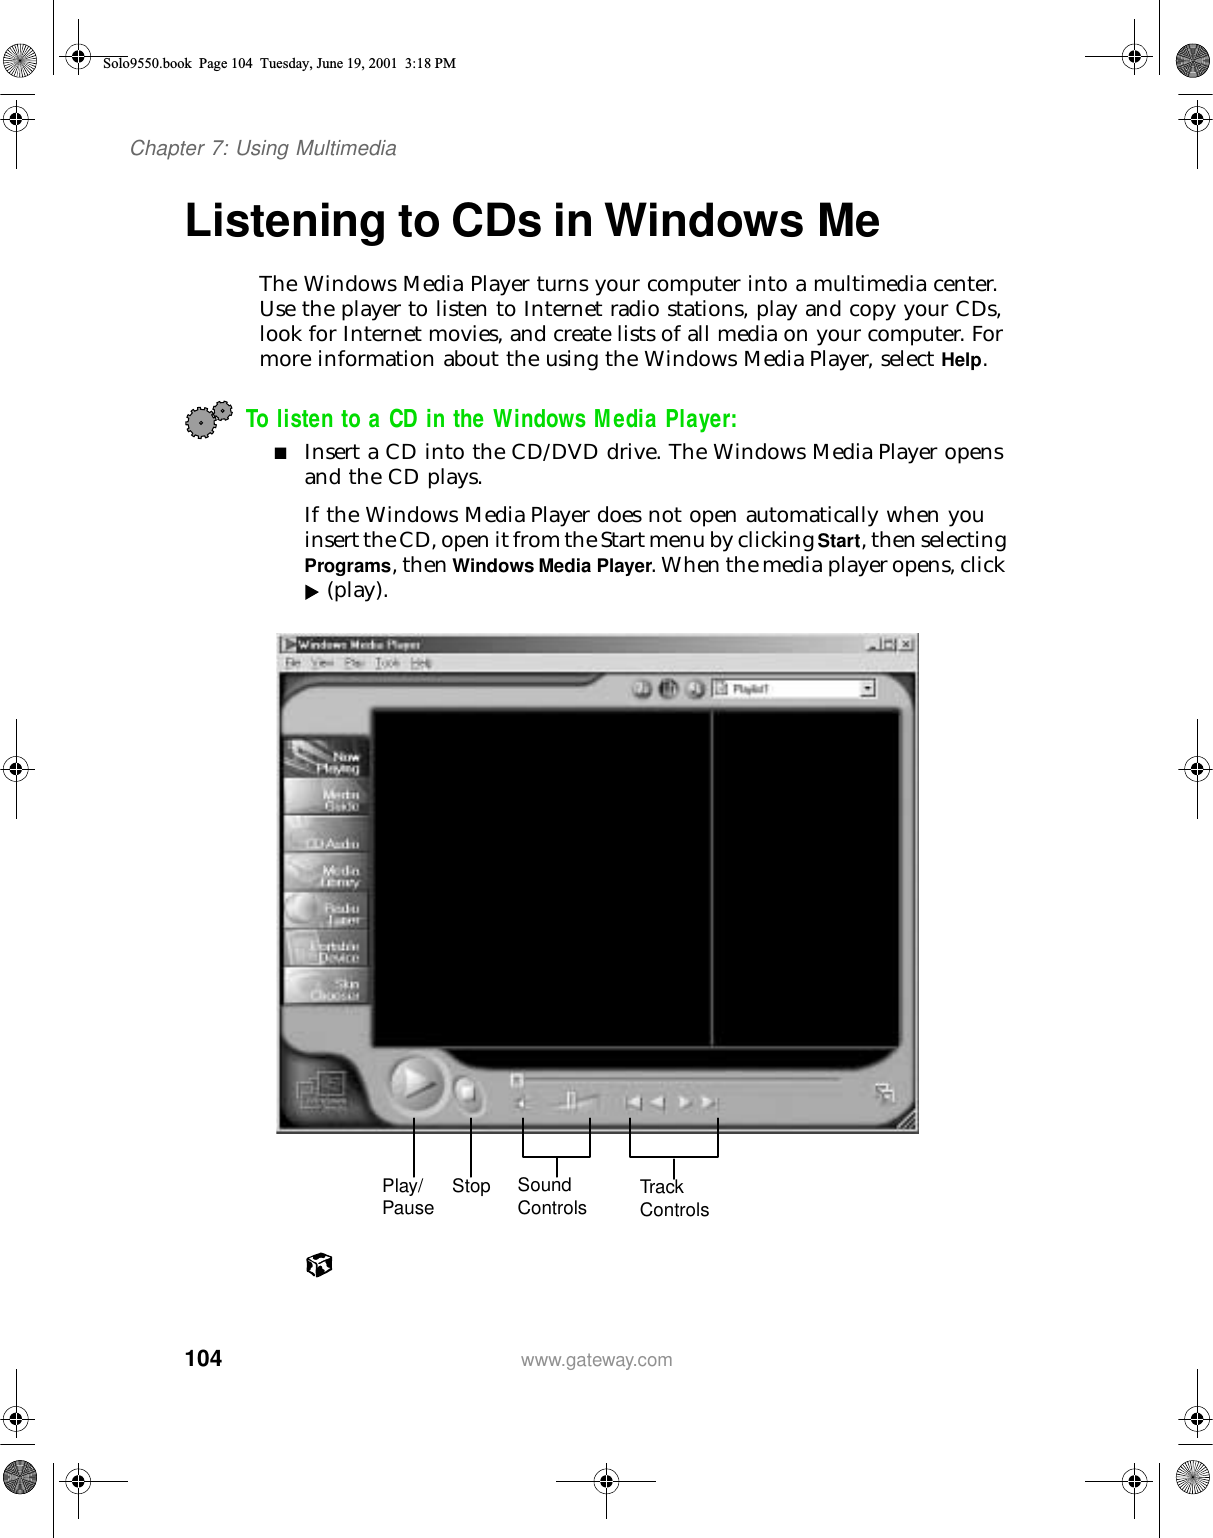 104Chapter 7: Using Multimediawww.gateway.comListening to CDs in Windows MeThe Windows Media Player turns your computer into a multimedia center. Use the player to listen to Internet radio stations, play and copy your CDs, look for Internet movies, and create lists of all media on your computer. For more information about the using the Windows Media Player, select Help.To listen to a CD in the Windows Media Player:■Insert a CD into the CD/DVD drive. The Windows Media Player opens and the CD plays.If the Windows Media Player does not open automatically when you insert the CD, open it from the Start menu by clicking Start, then selecting Programs, then Windows Media Player. When the media player opens, click  (play).Play/Pause Stop Sound Controls Track  ControlsSolo9550.book Page 104 Tuesday, June 19, 2001 3:18 PM